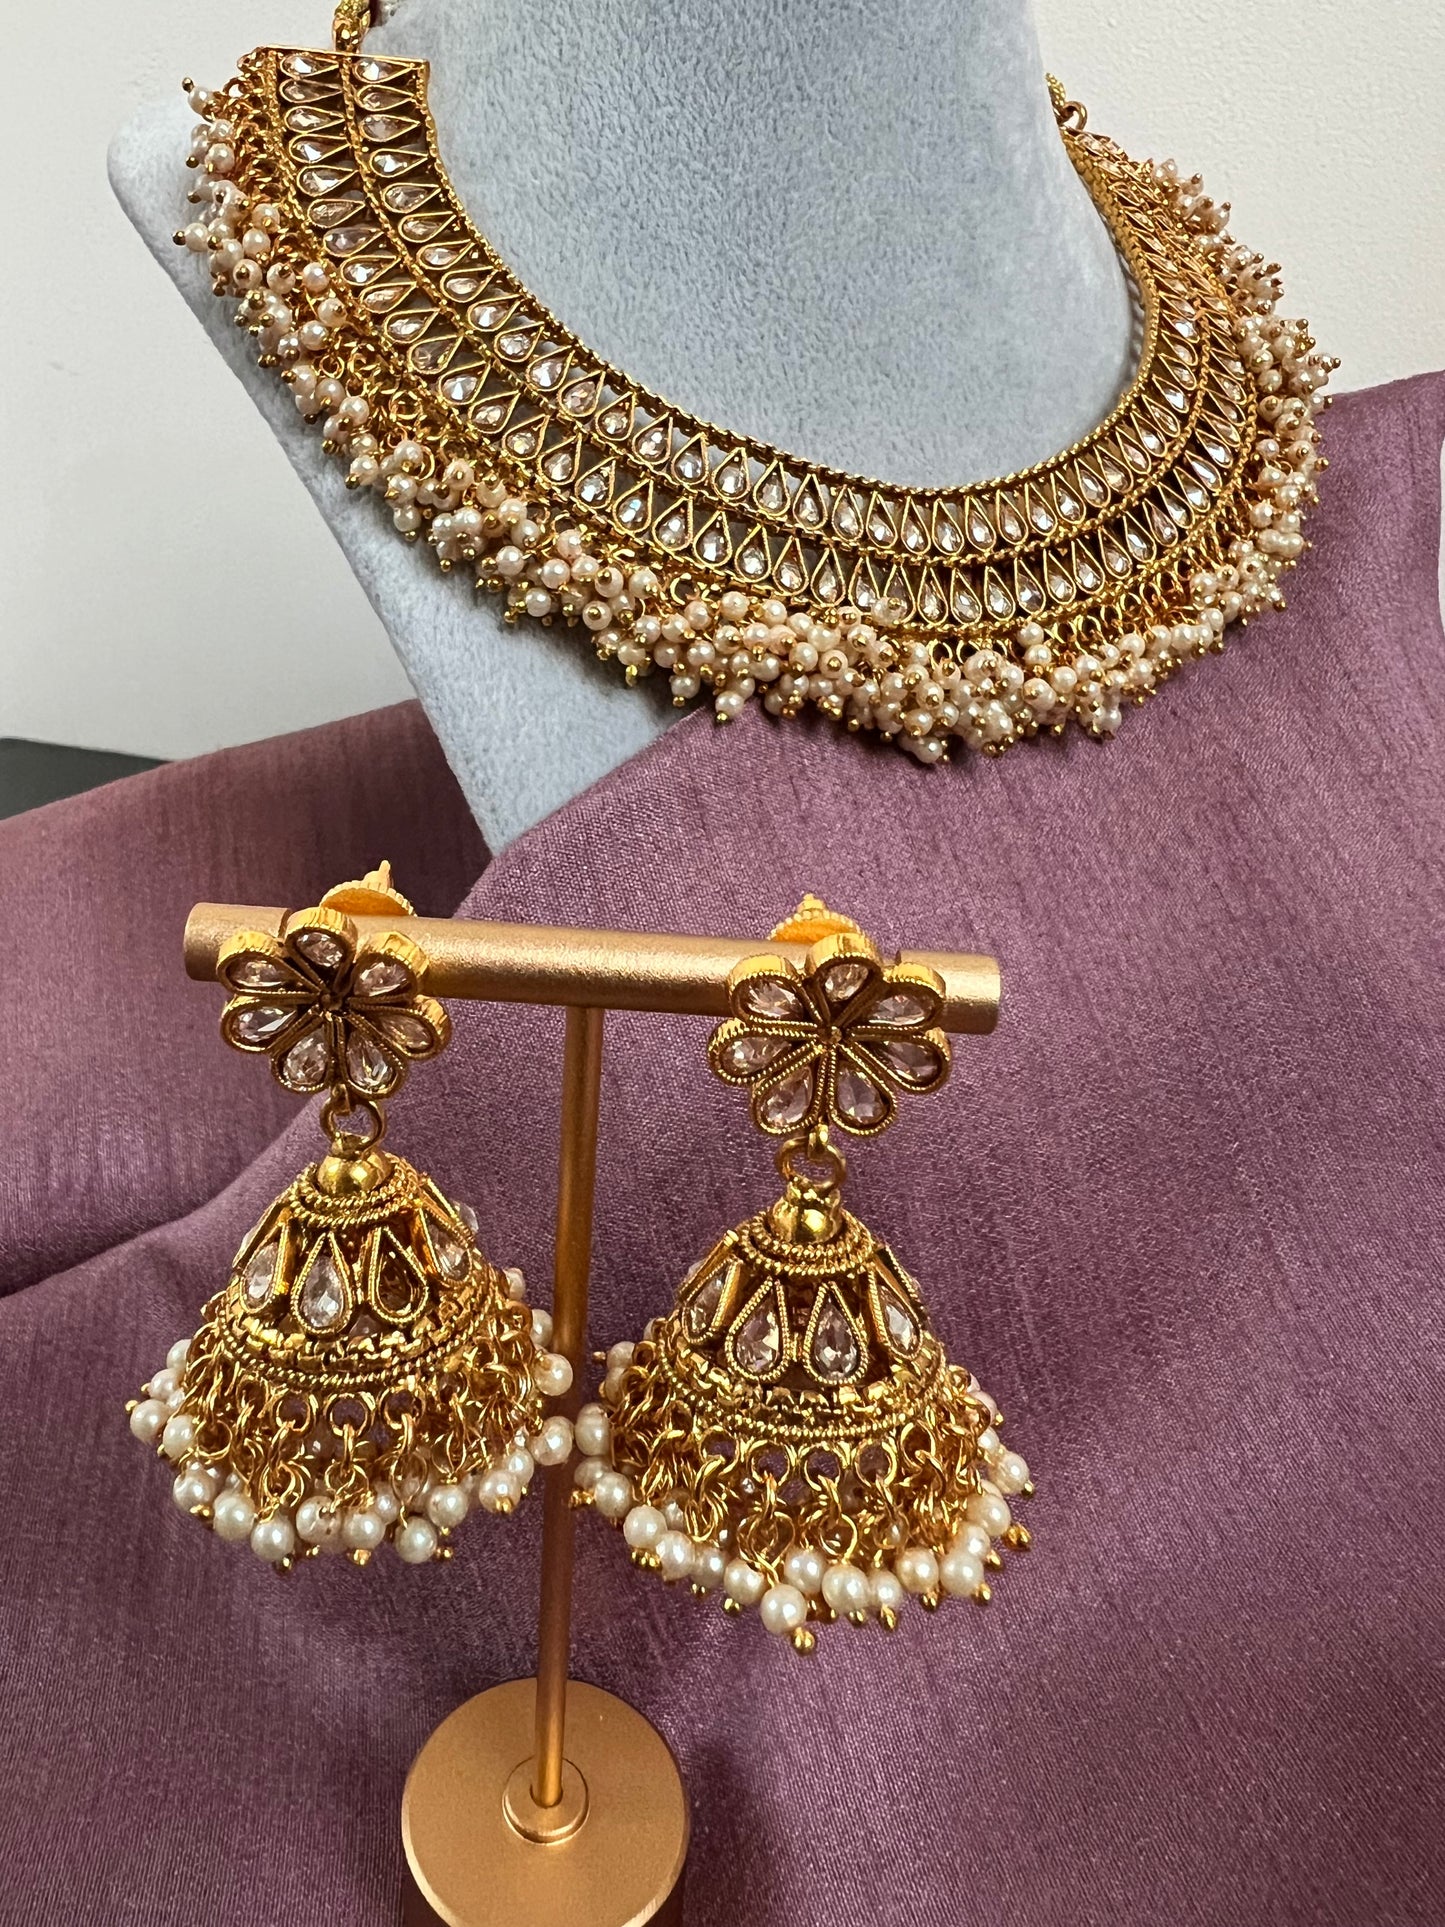 Choker golden kundan stone hanging ivory pearls necklace set with earrings N3055